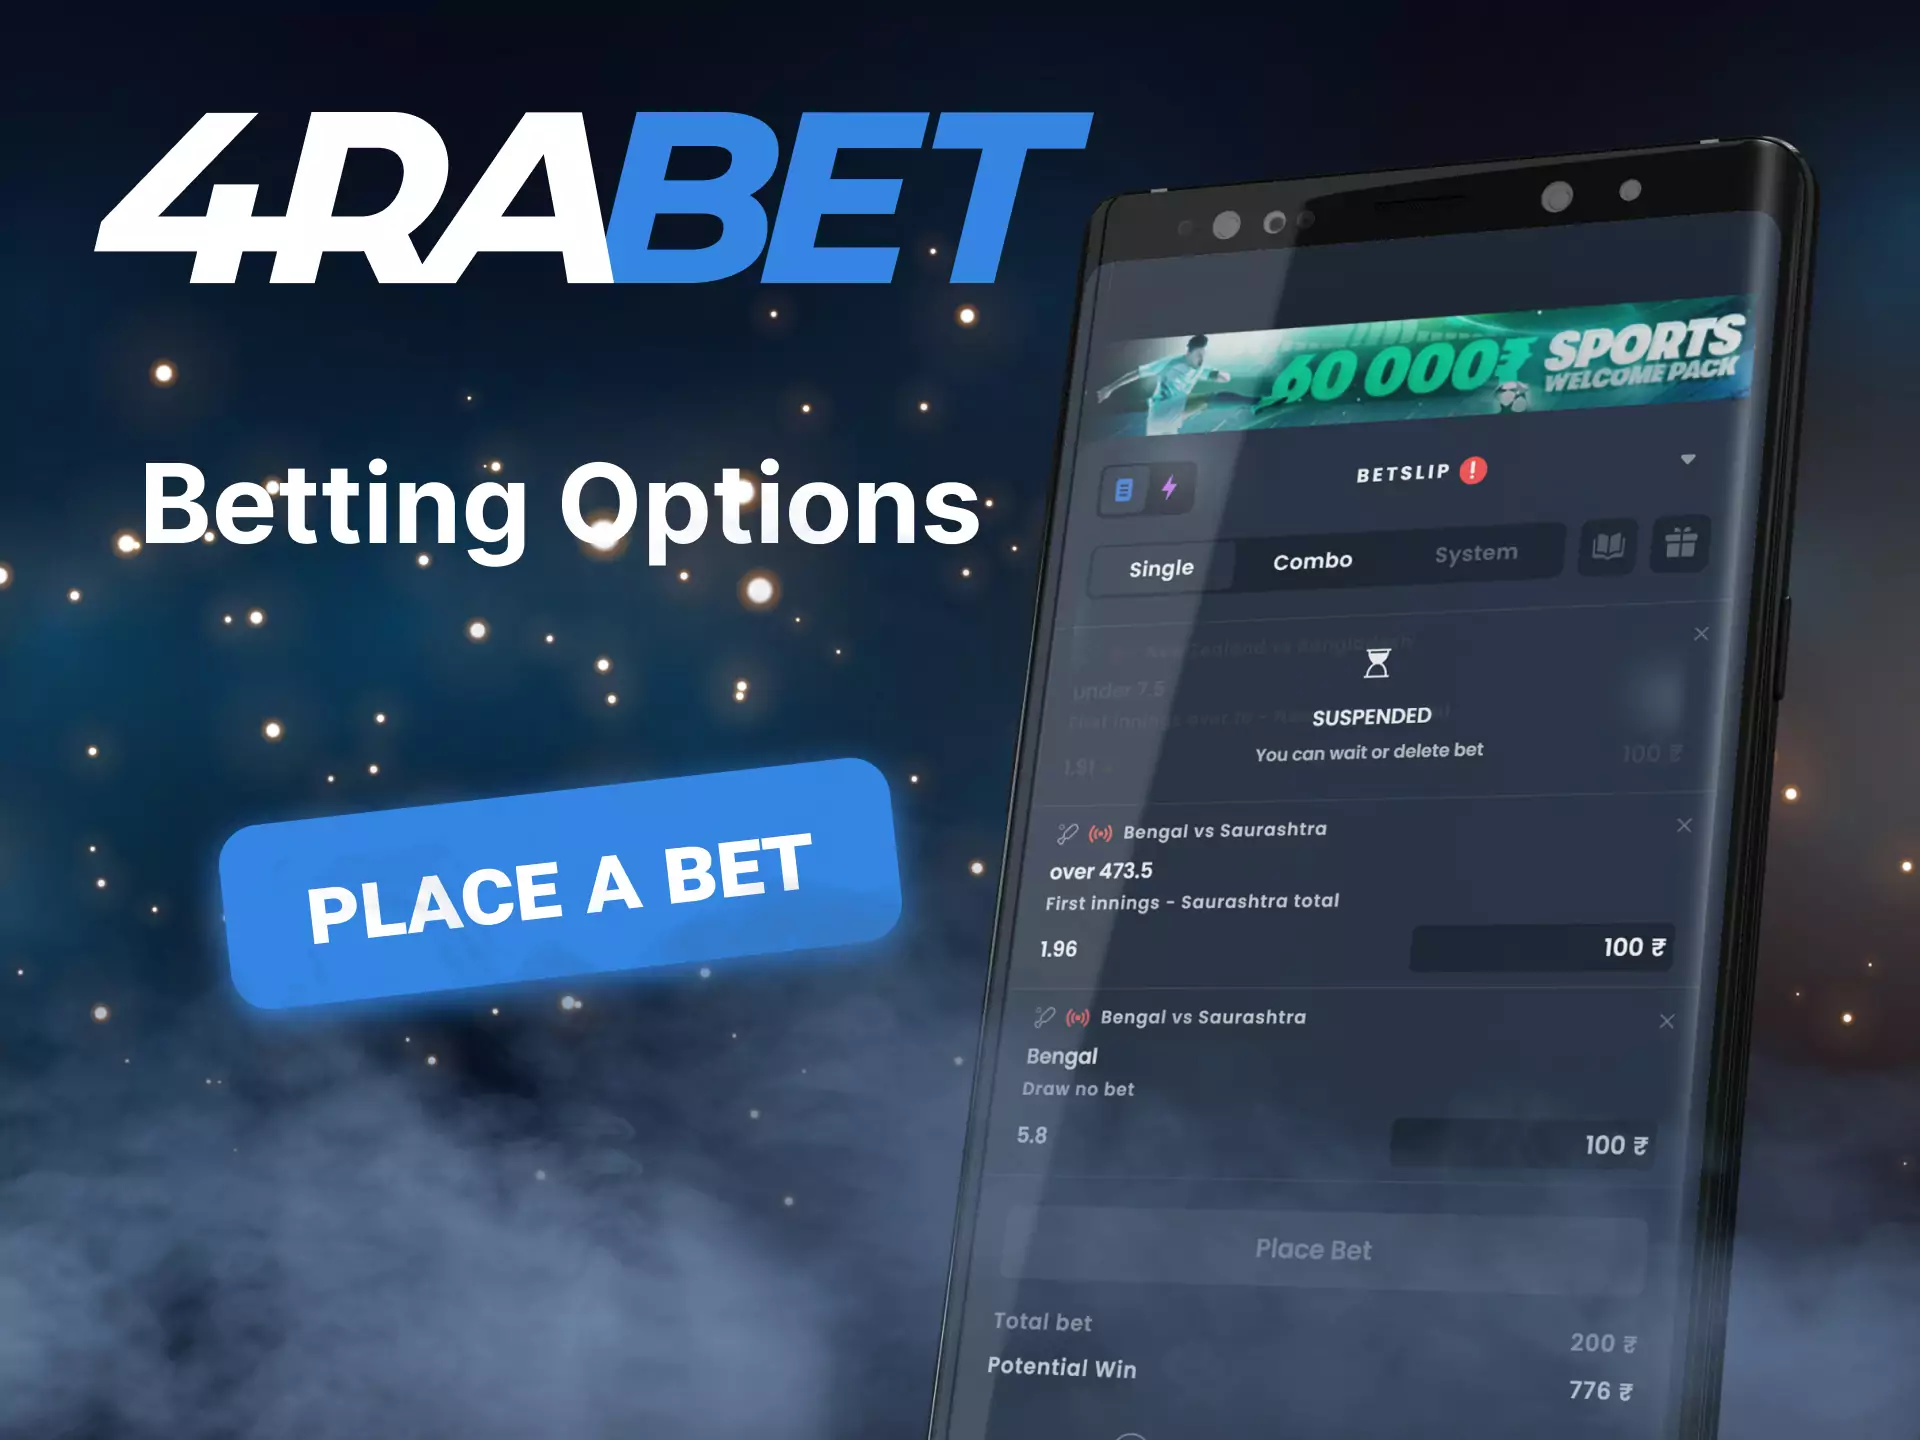 Explore all betting options in the 4rabet mobile app.